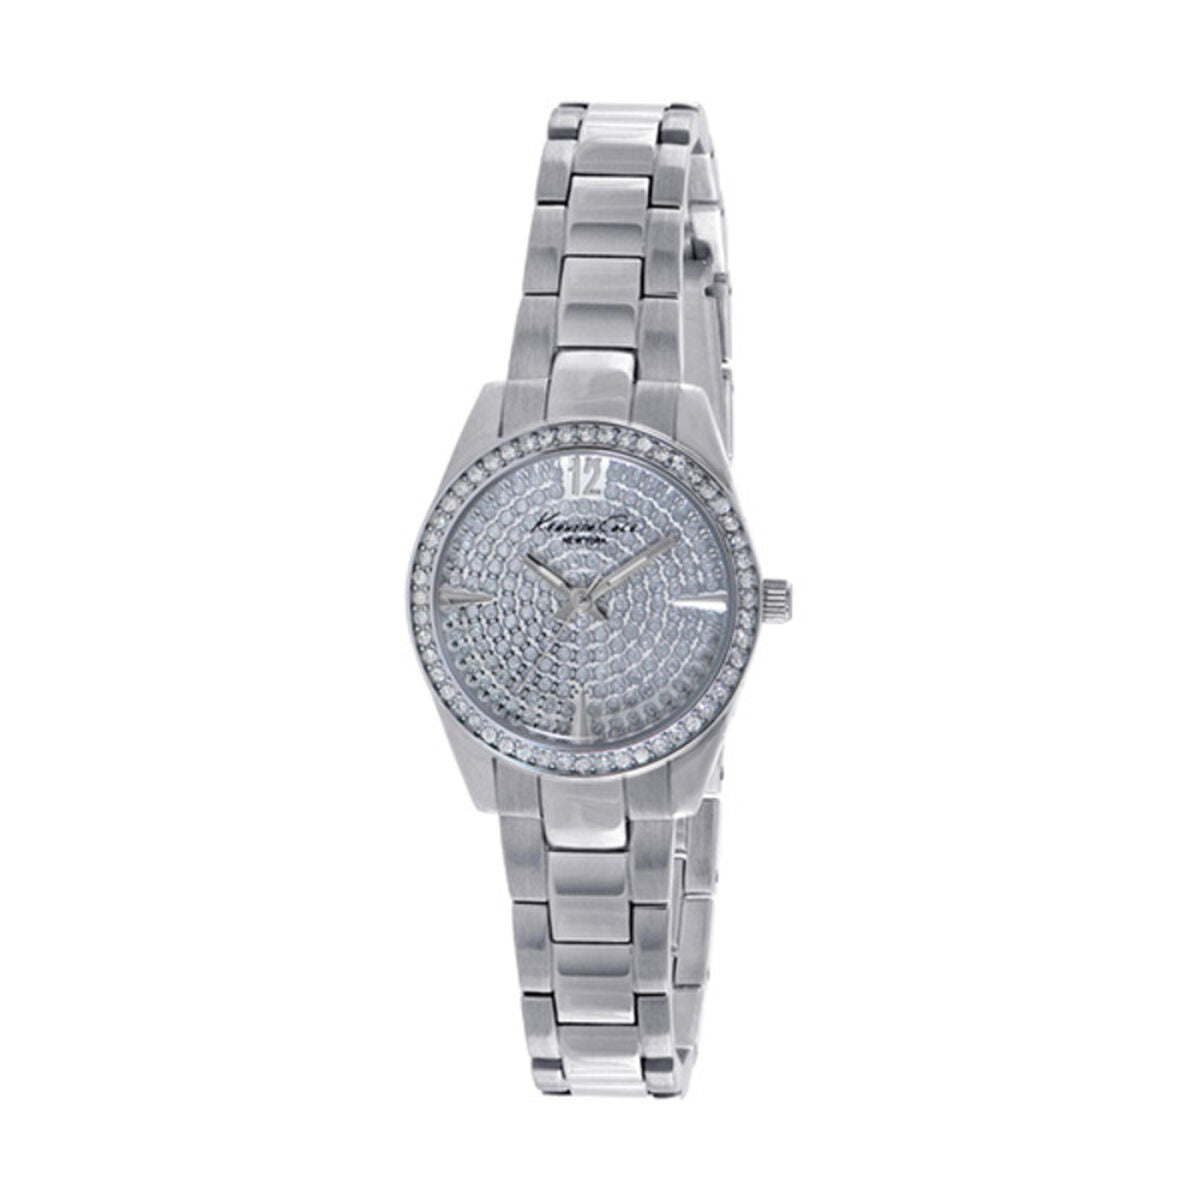 Ladies' Watch Kenneth Cole IKC4978 (Ø 28 mm), Kenneth Cole, Watches, Women, ladies-watch-kenneth-cole-ikc4978-o-28-mm, : Quartz Movement, :Silver, Brand_Kenneth Cole, category-reference-2570, category-reference-2635, category-reference-2995, category-reference-t-19667, category-reference-t-19725, Condition_NEW, fashion, gifts for women, original gifts, Price_50 - 100, RiotNook